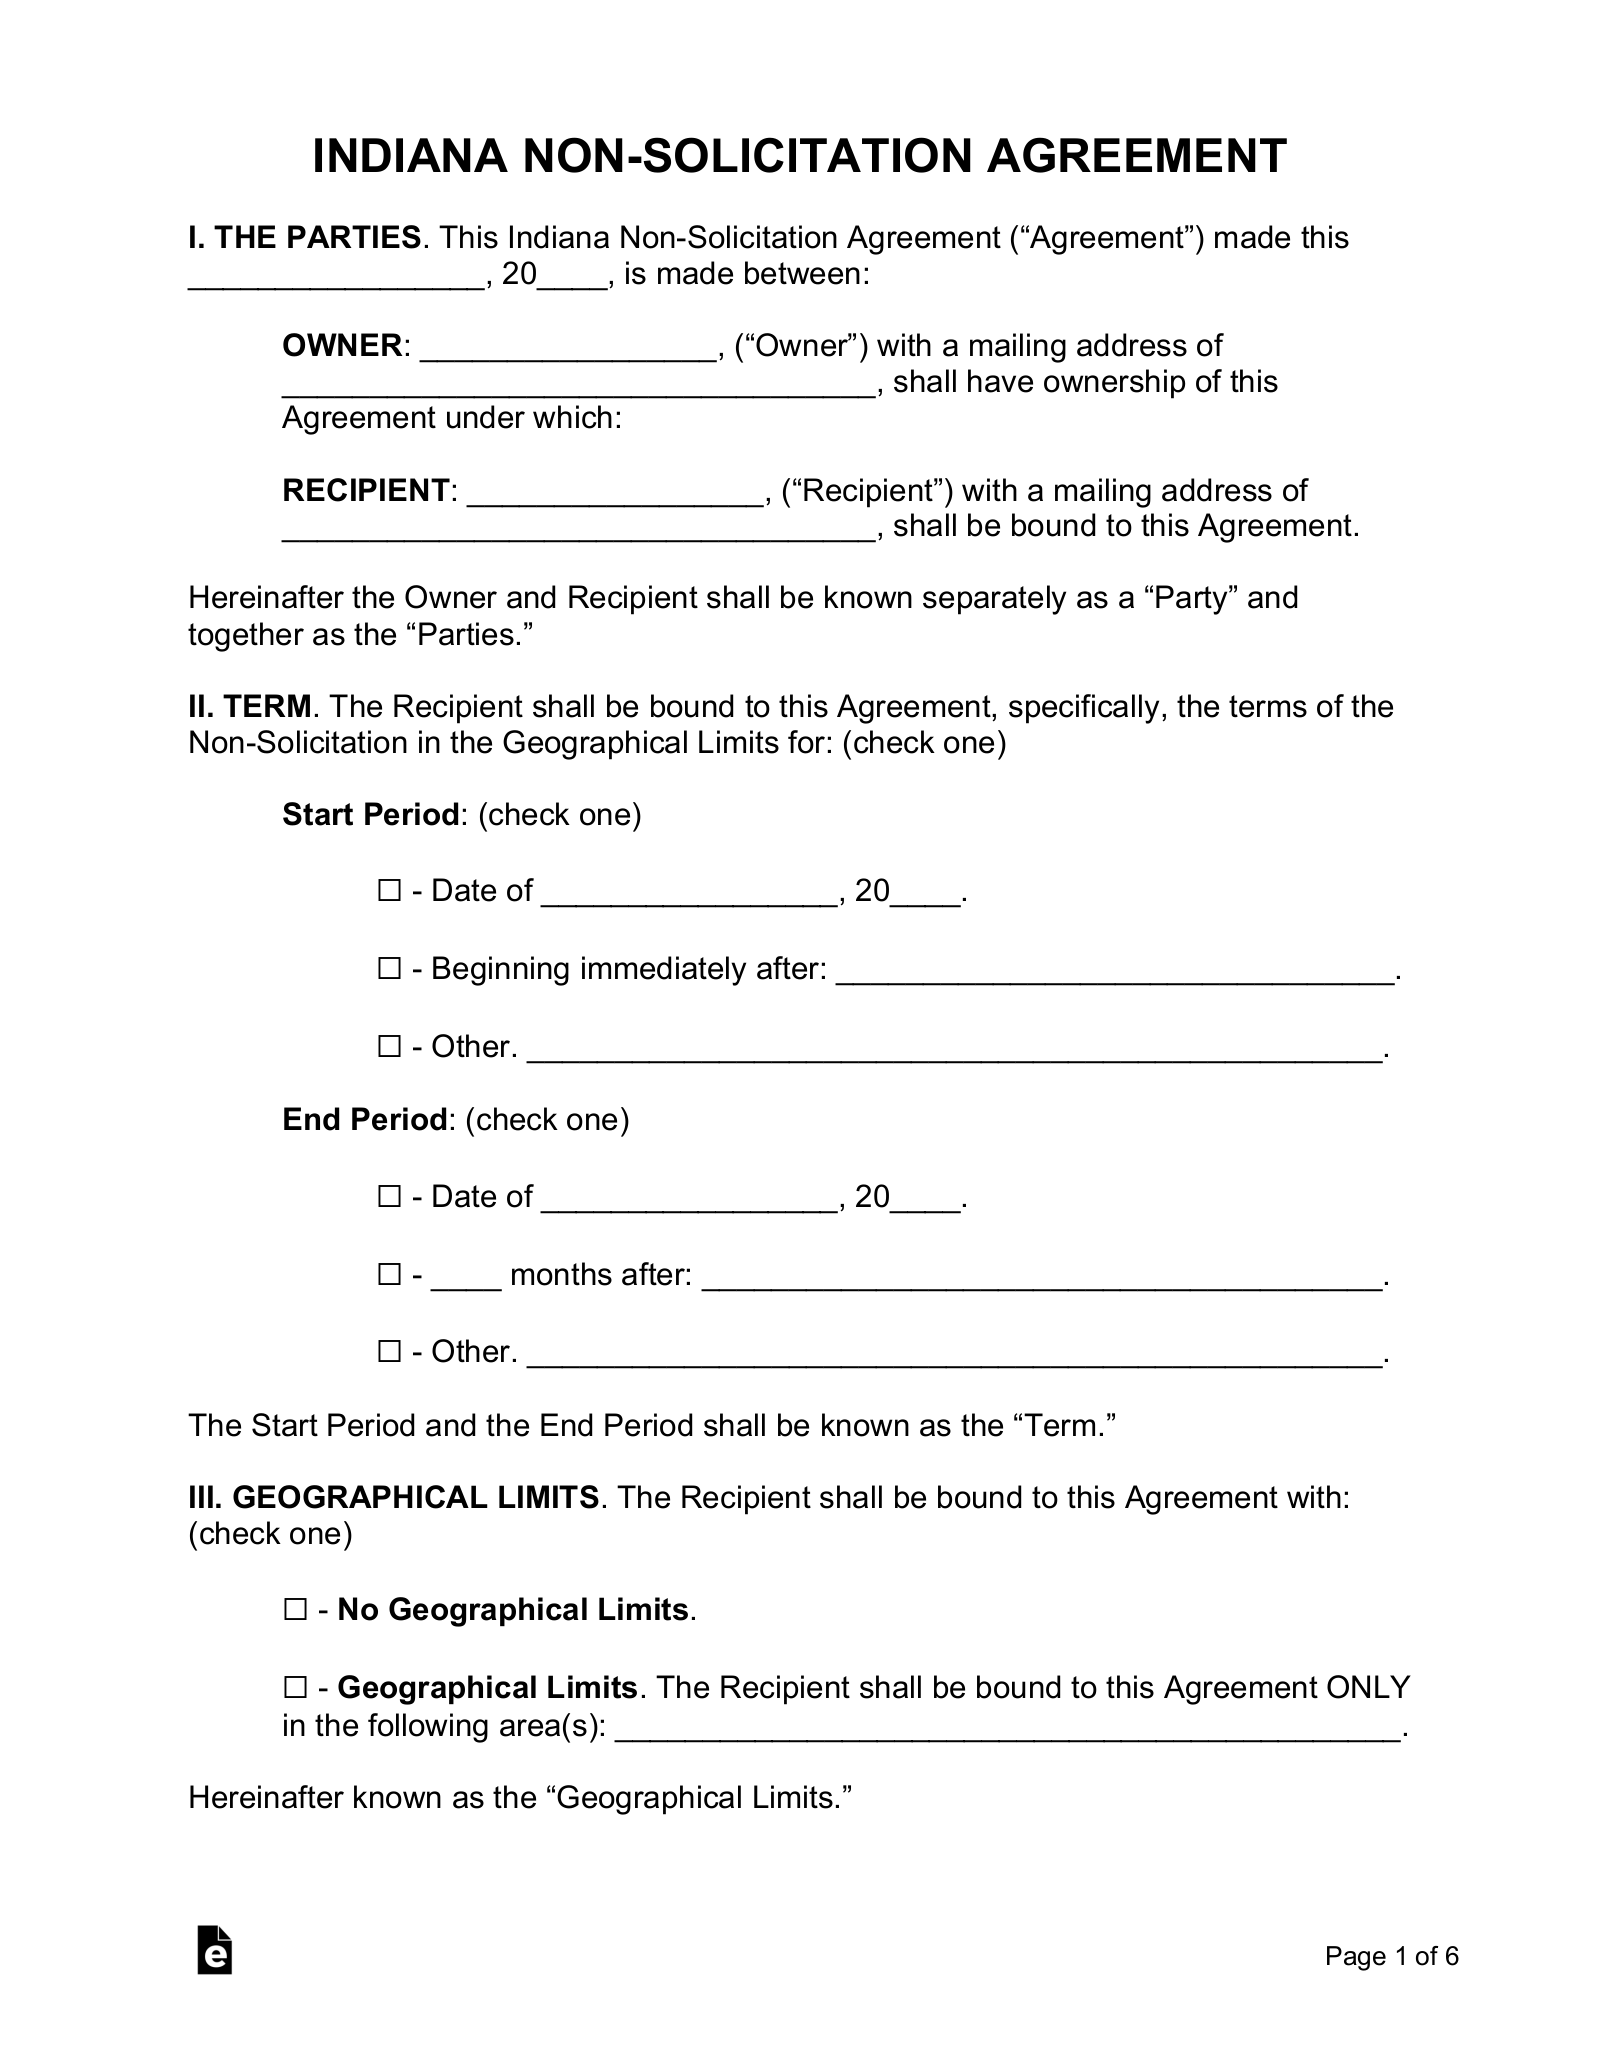 Indiana Non-Solicitation Agreement